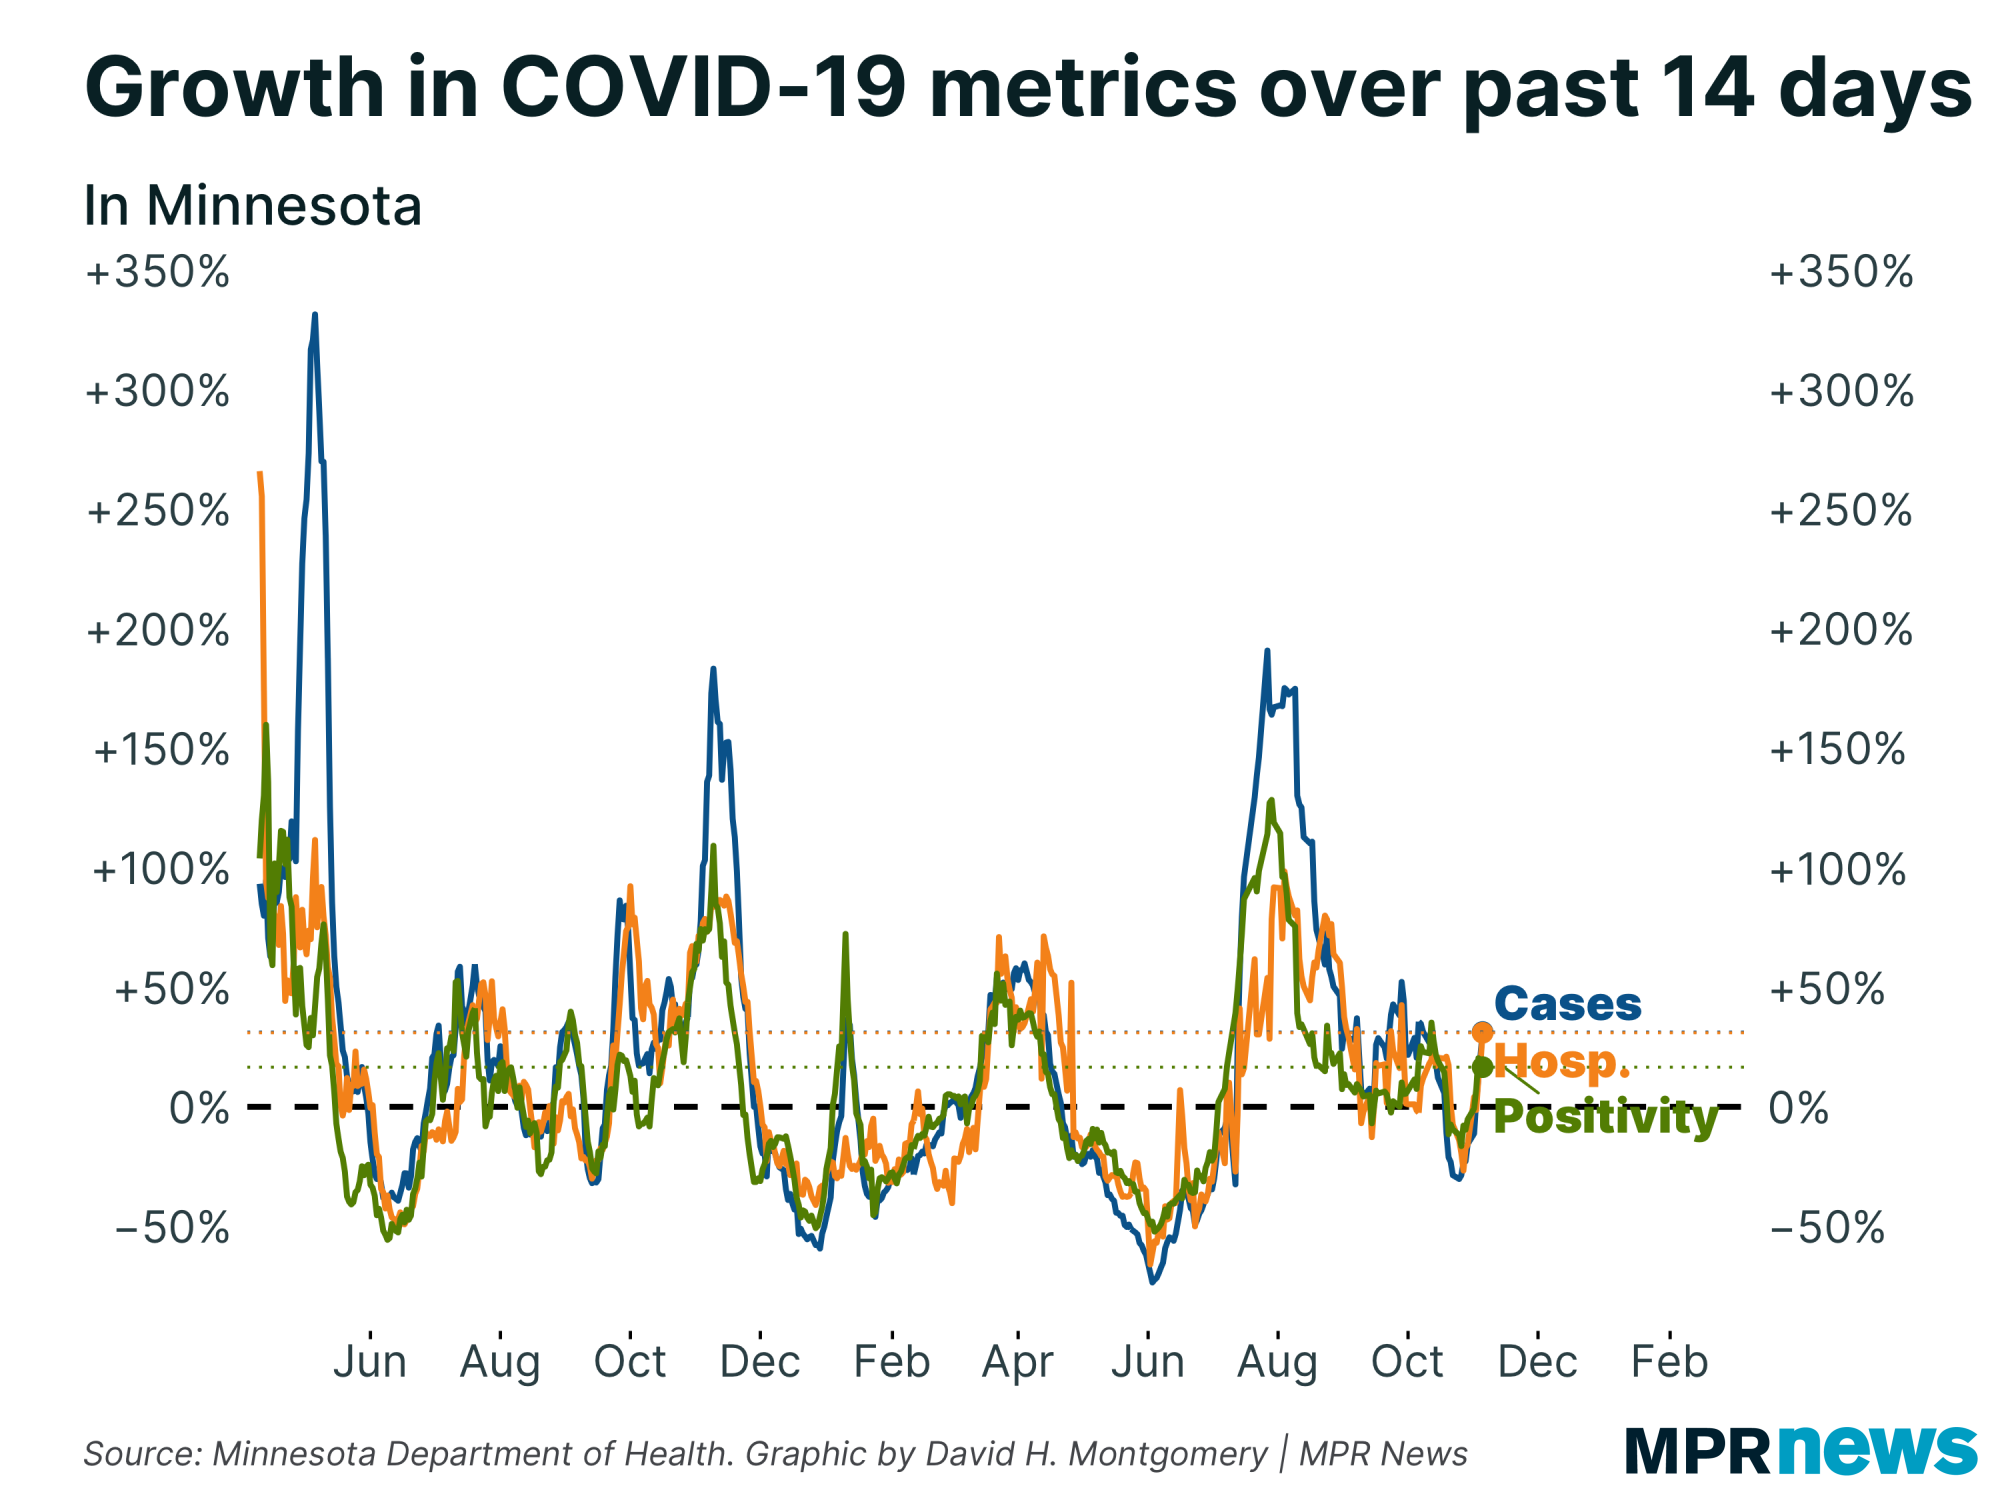 Graph of the growth in COVID-19 metrics over the past 14 days